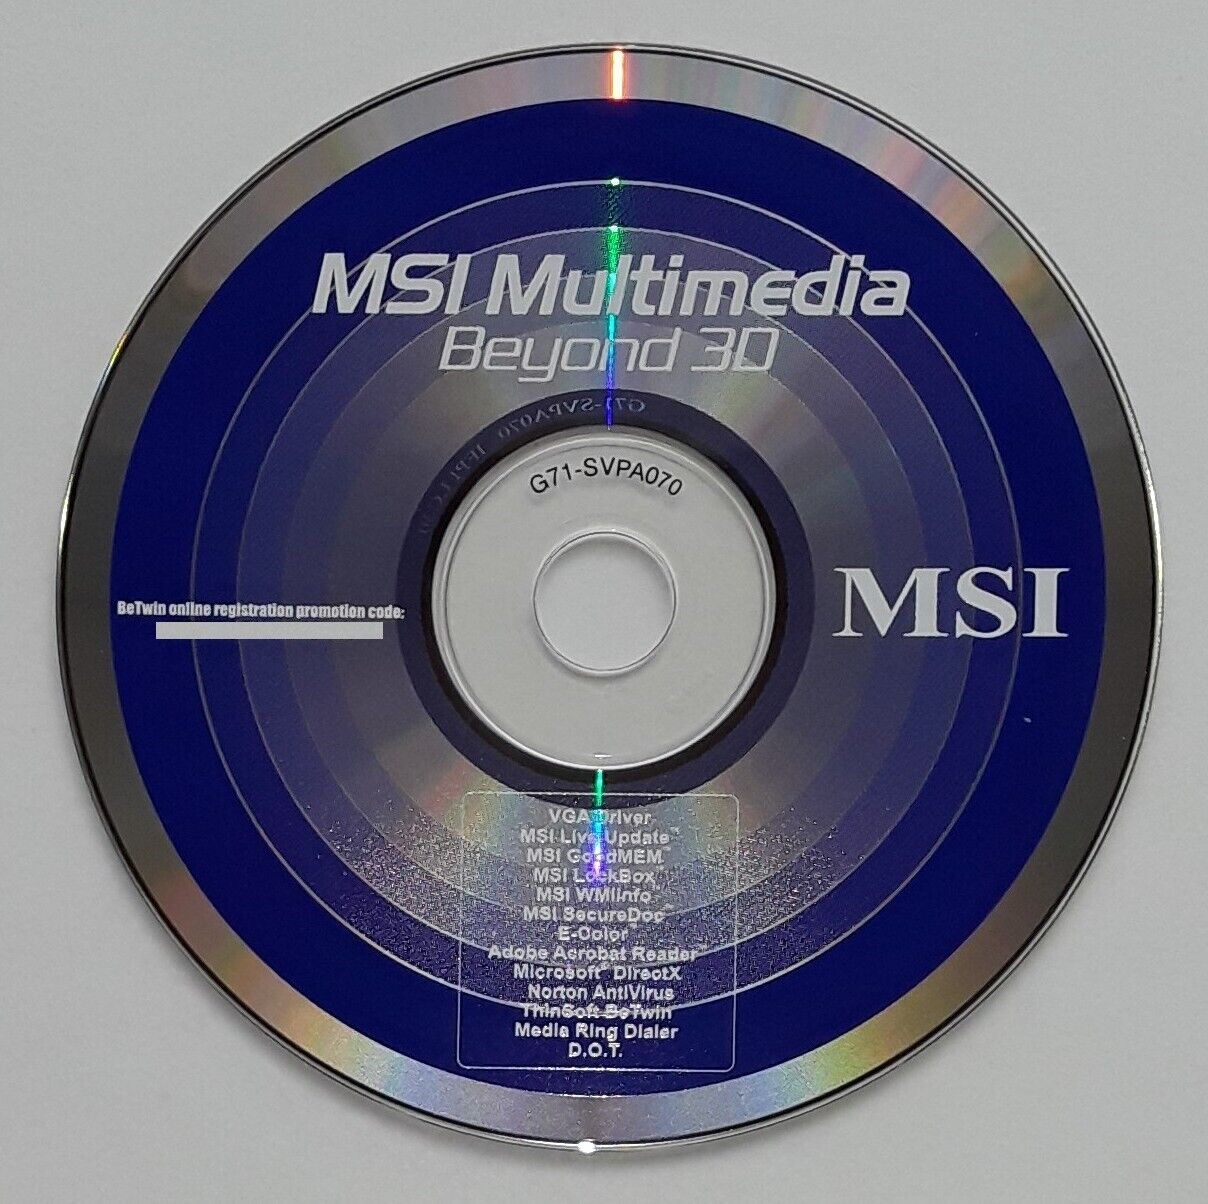 MSI Multimedia Beyond 3D NEW Driver Software for GeForce Video Cards G71-SVPA070